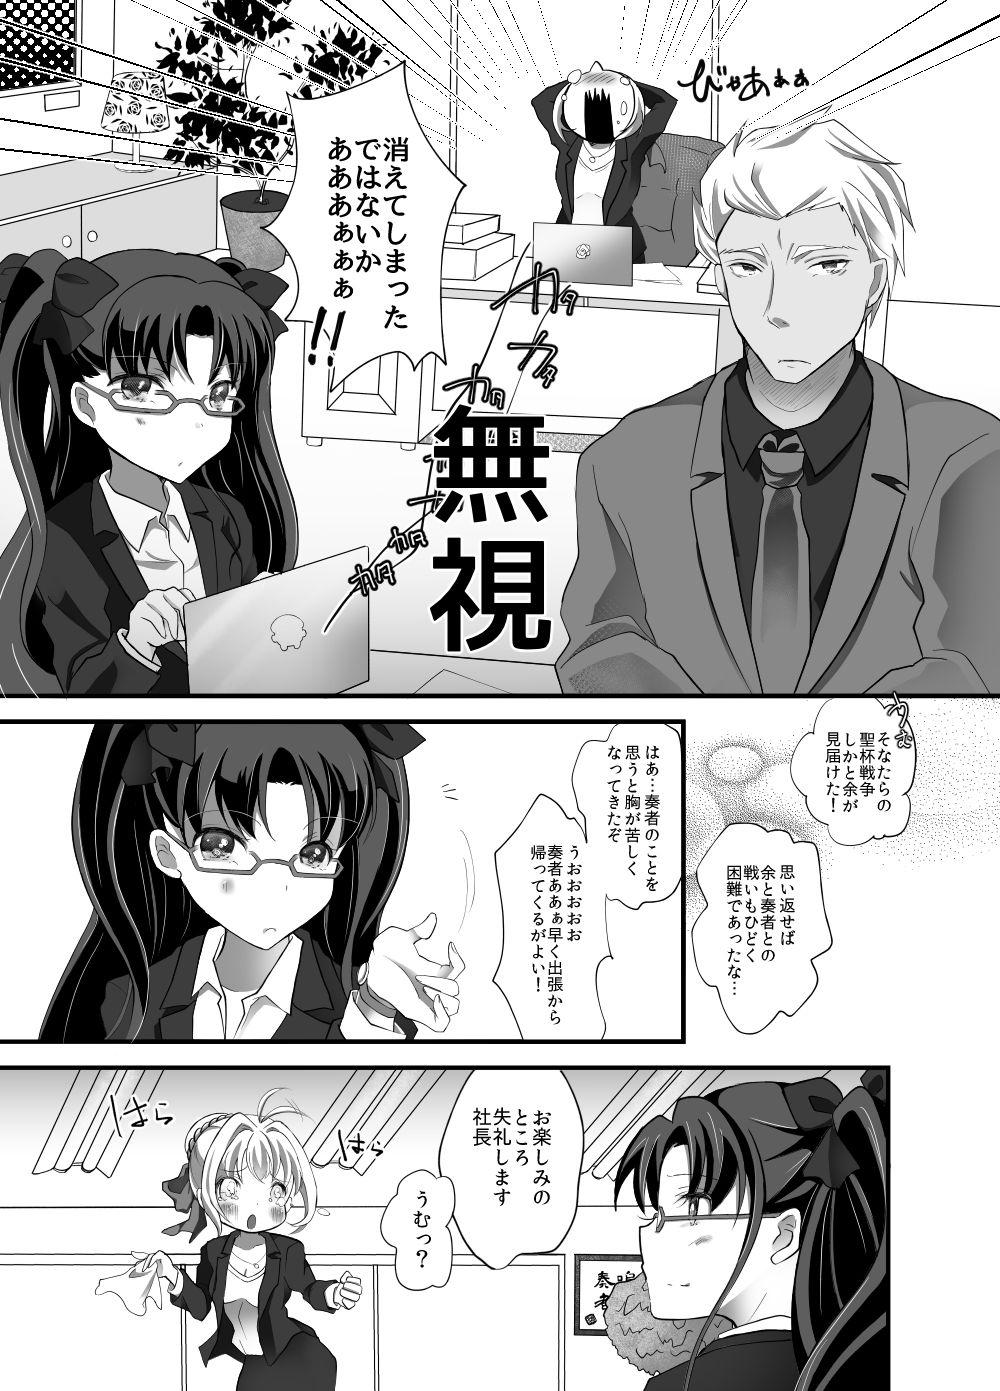 Amateur Asian IYI - Fate stay night Korean - Page 5